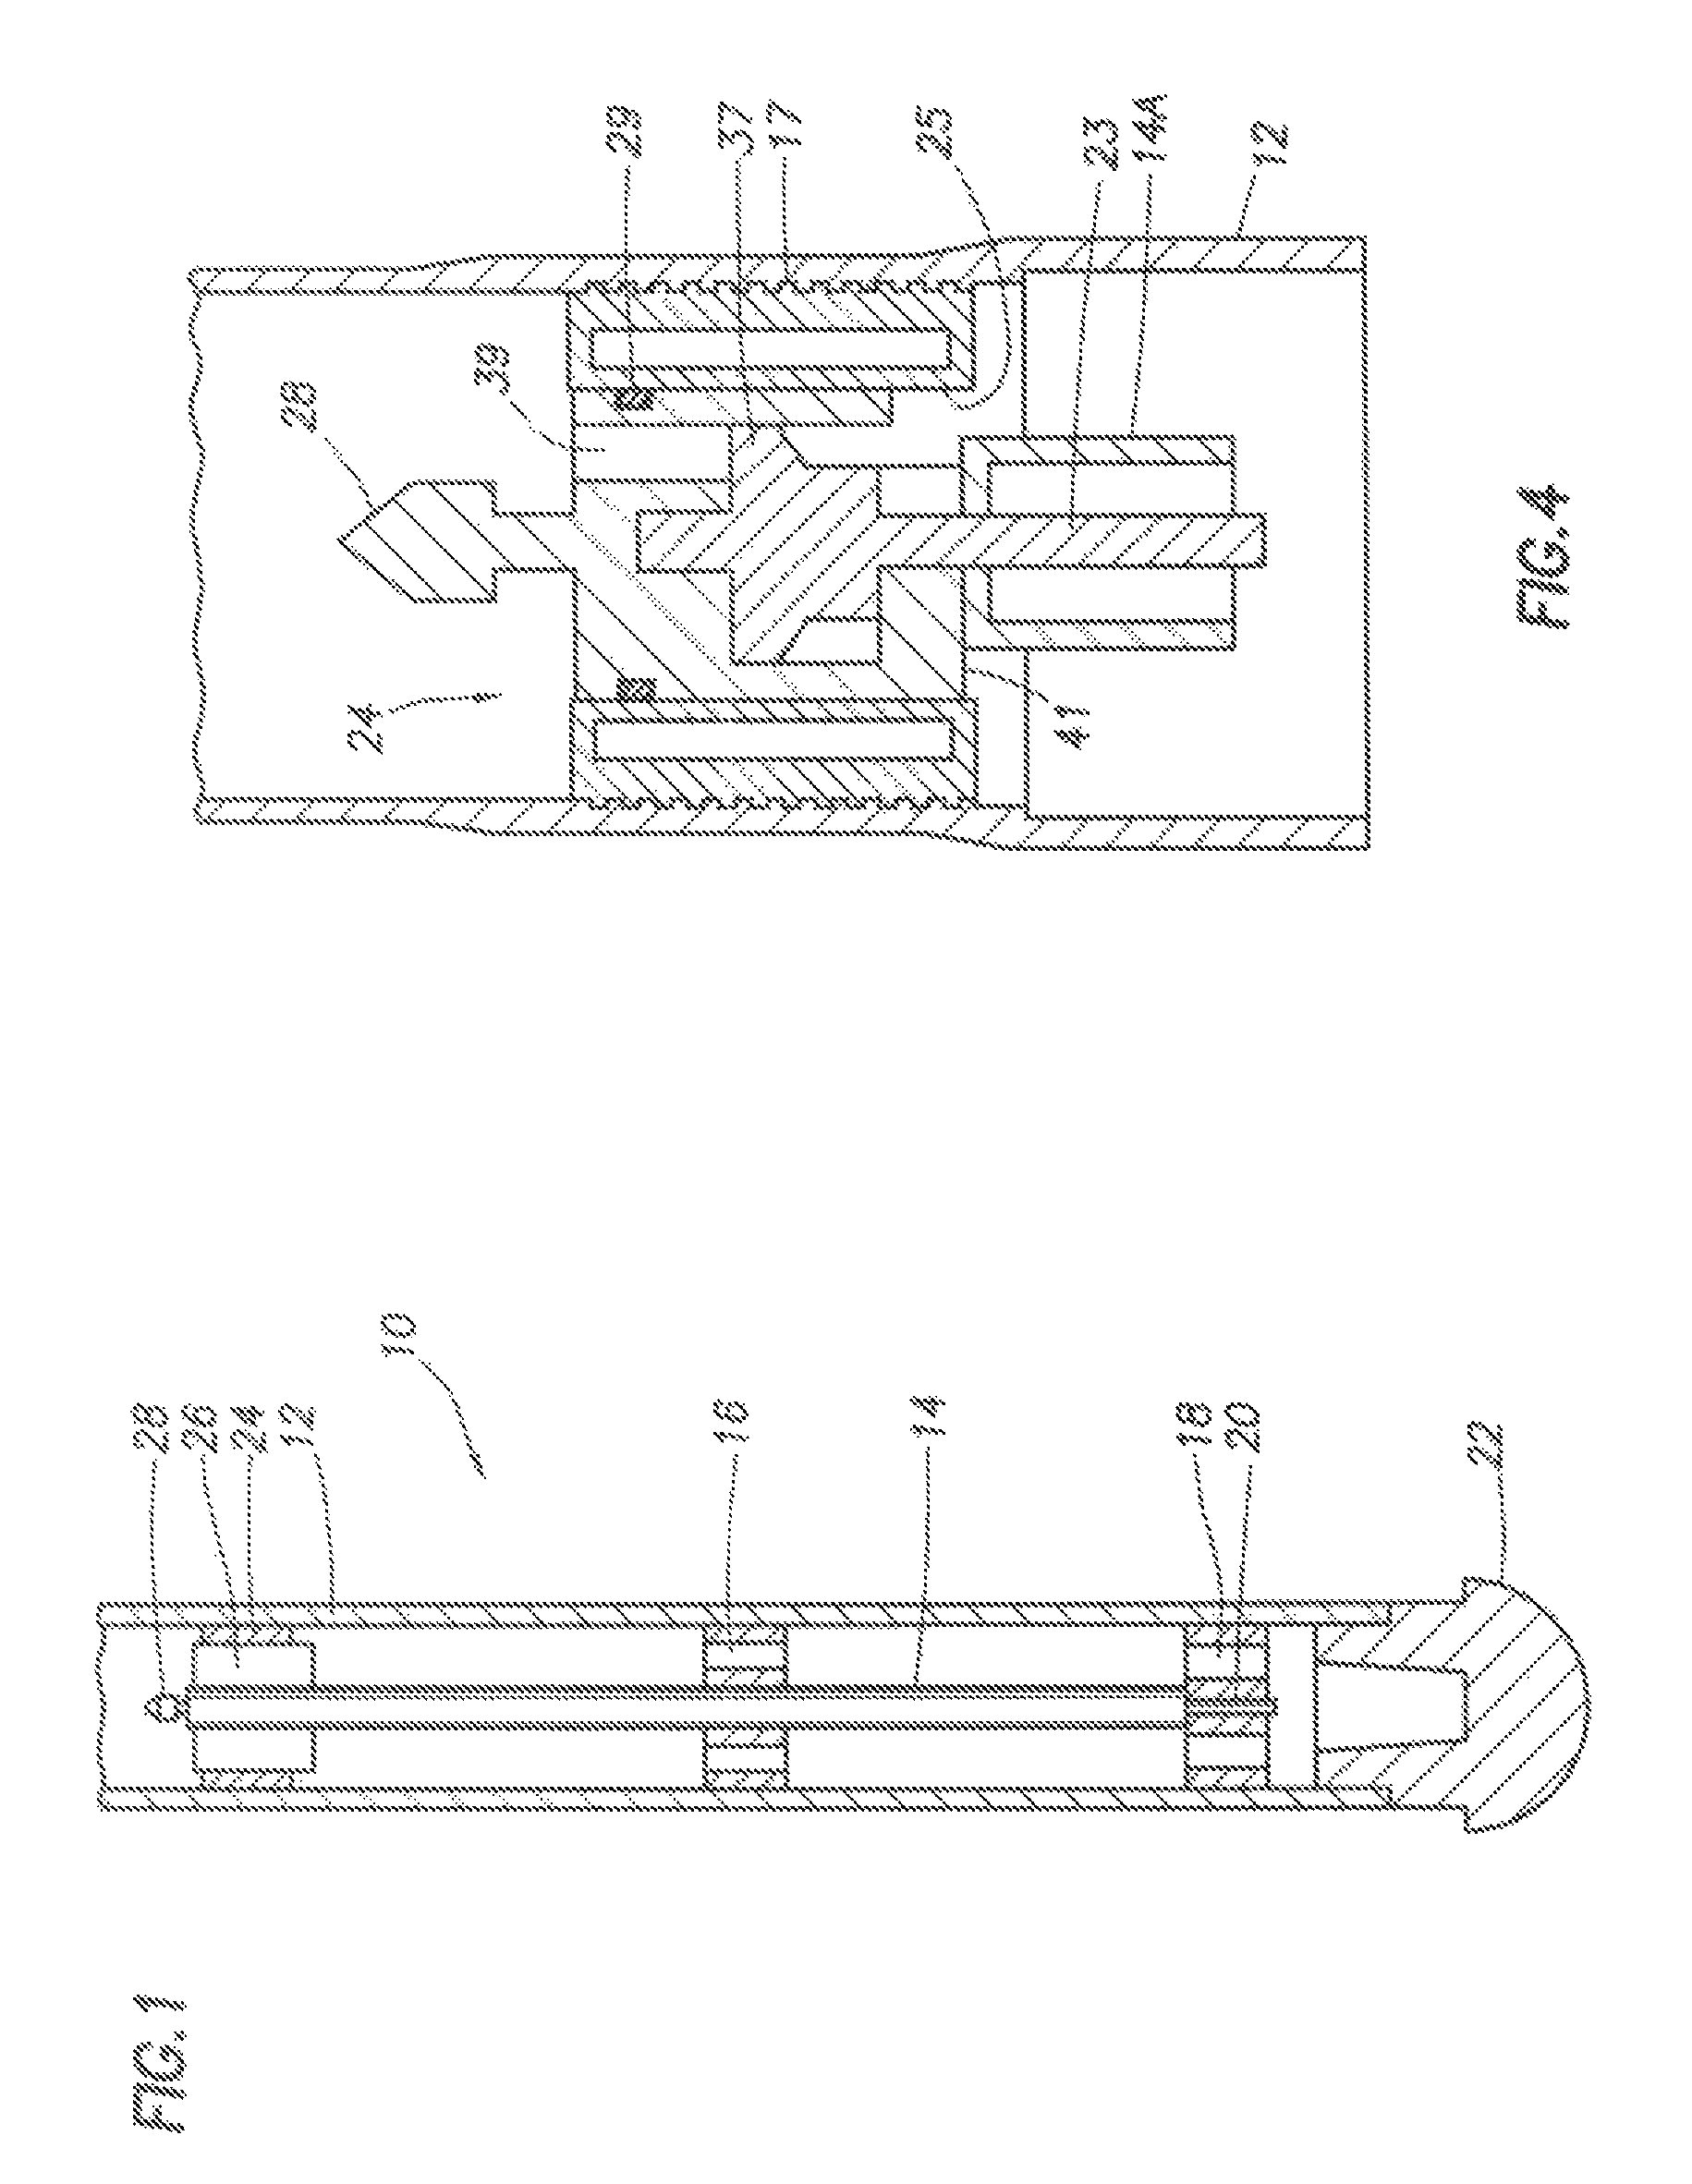 System and method for making drilling parameter and or formation evaluation measurements during casing drilling